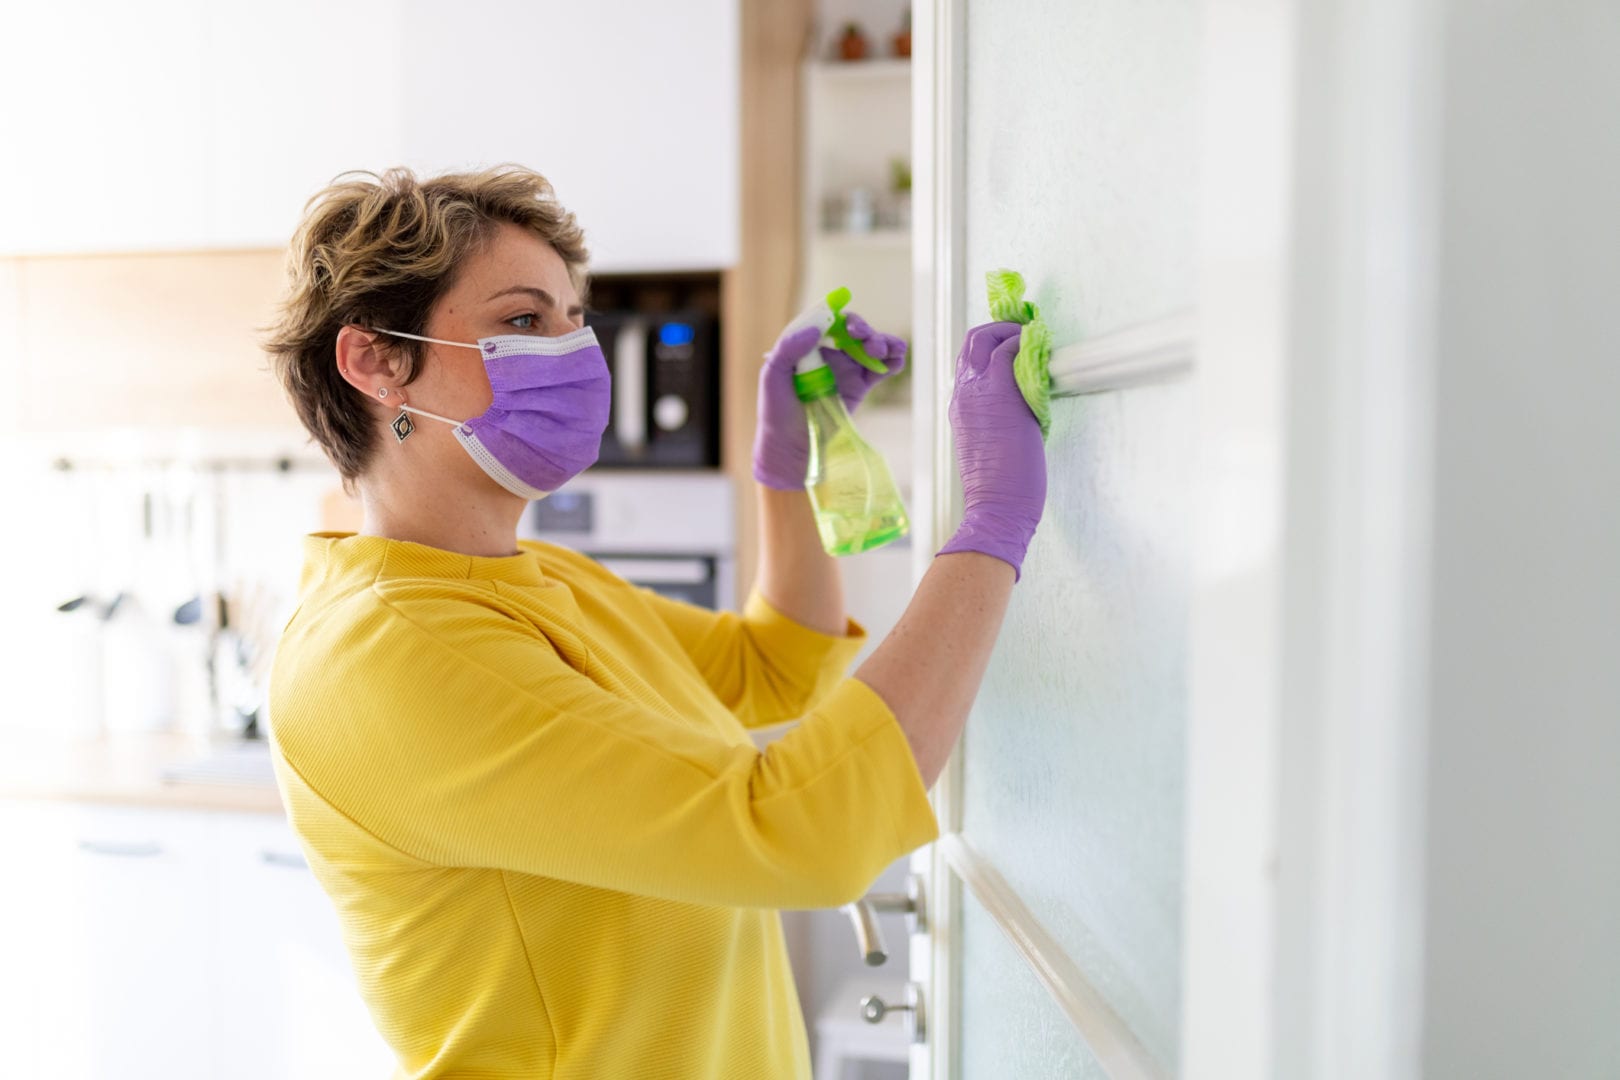 When can I hire a house cleaner and what safety measures should we take?